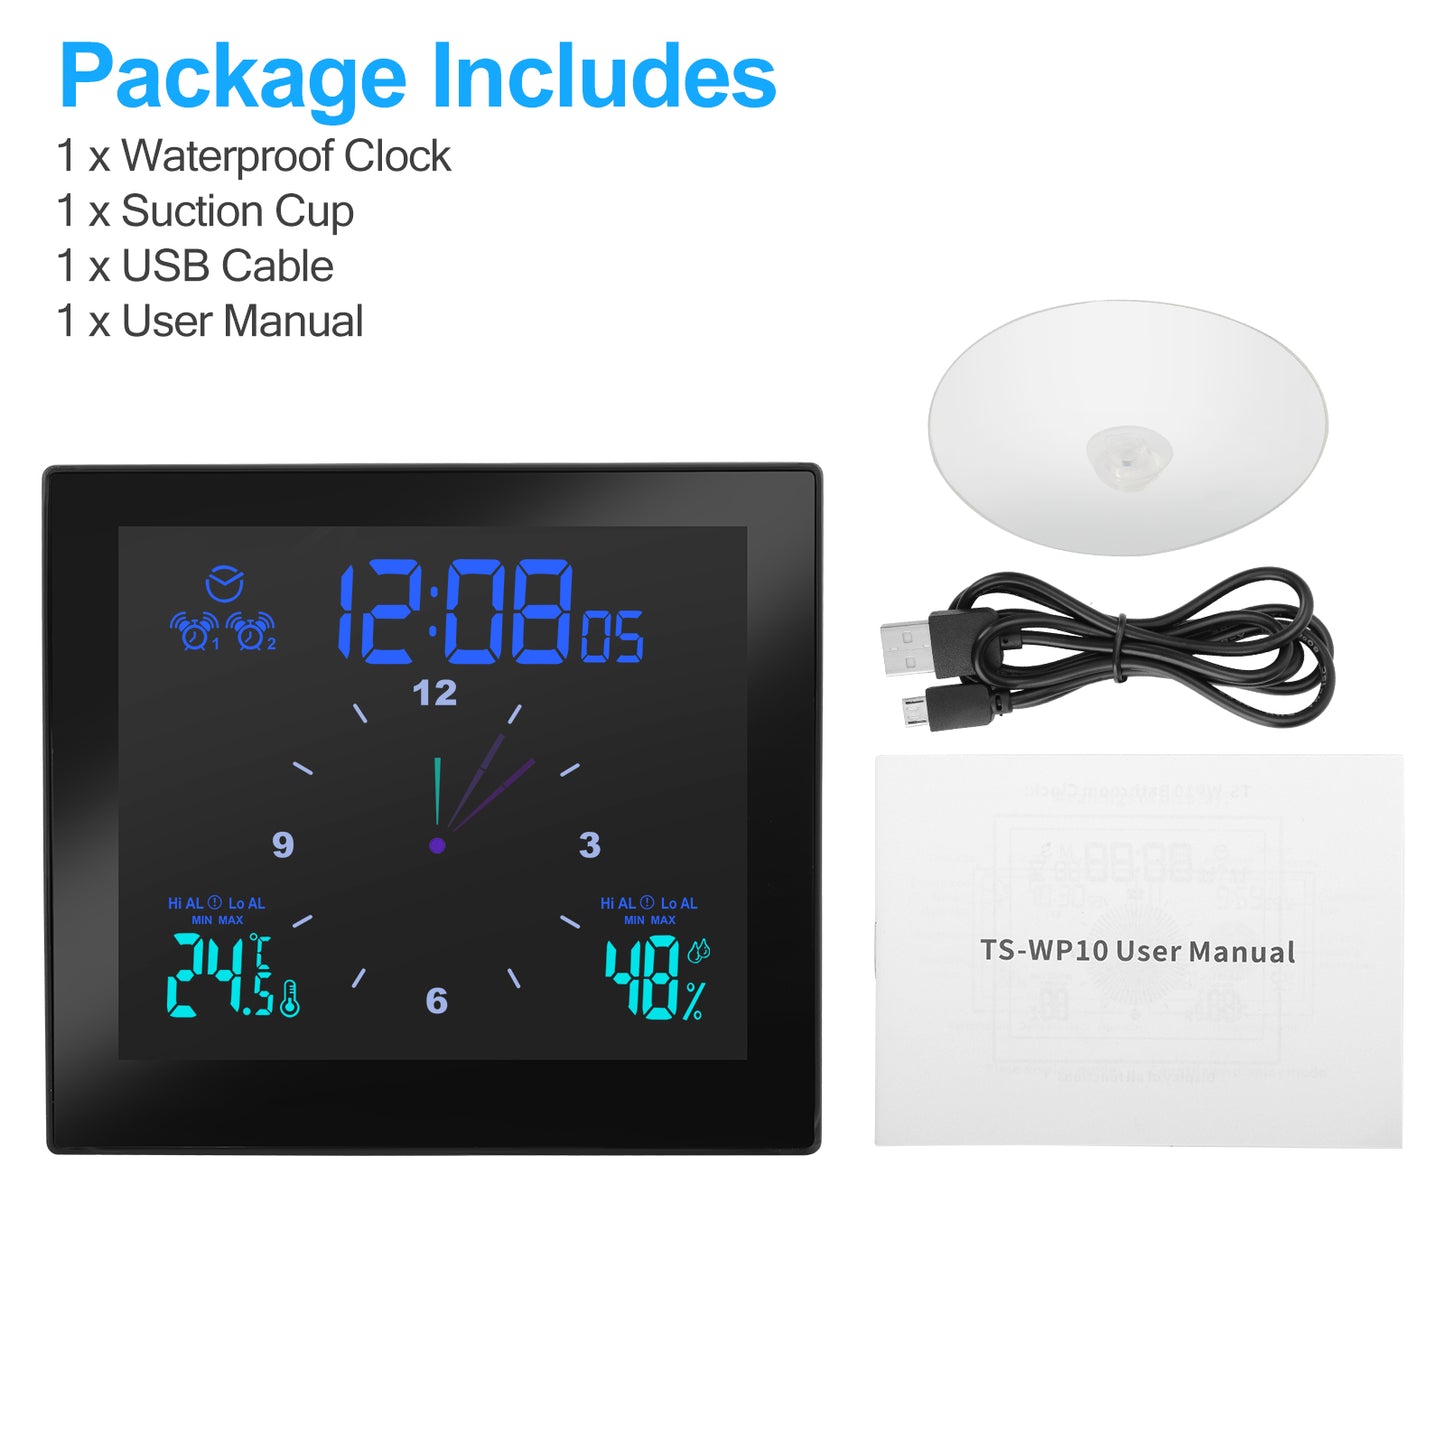 Digital Waterproof Clock - prefer bathroom with Alarm Shower Timer with Dynamic Dashboard,Large Led Screen 3 Backlights Waterproof IP65 Wall Clock with Temperature Humidity Display and Exceed max/min with Suction Cup ( No drilling required ), White